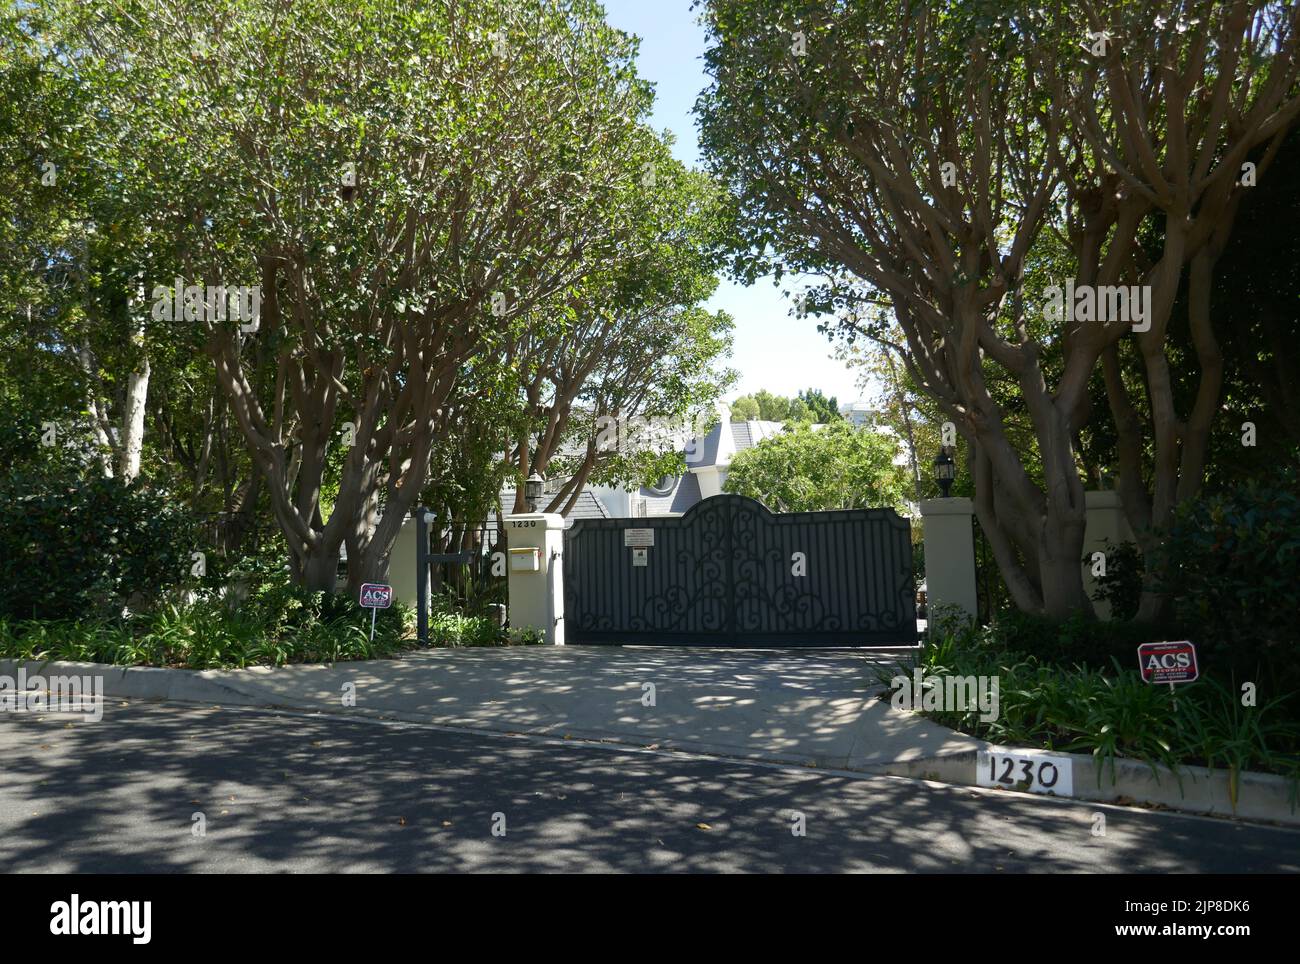 Beverly Hills, California, USA 15th August 2022 Singer Rod Stewart and Model Rachel Hunter's Former Home/house/estate at 1230 Chanruss Place on August 15, 2022 in Beverly Hills, California, USA. Photo by Barry King/Alamy Stock Photo Stock Photo